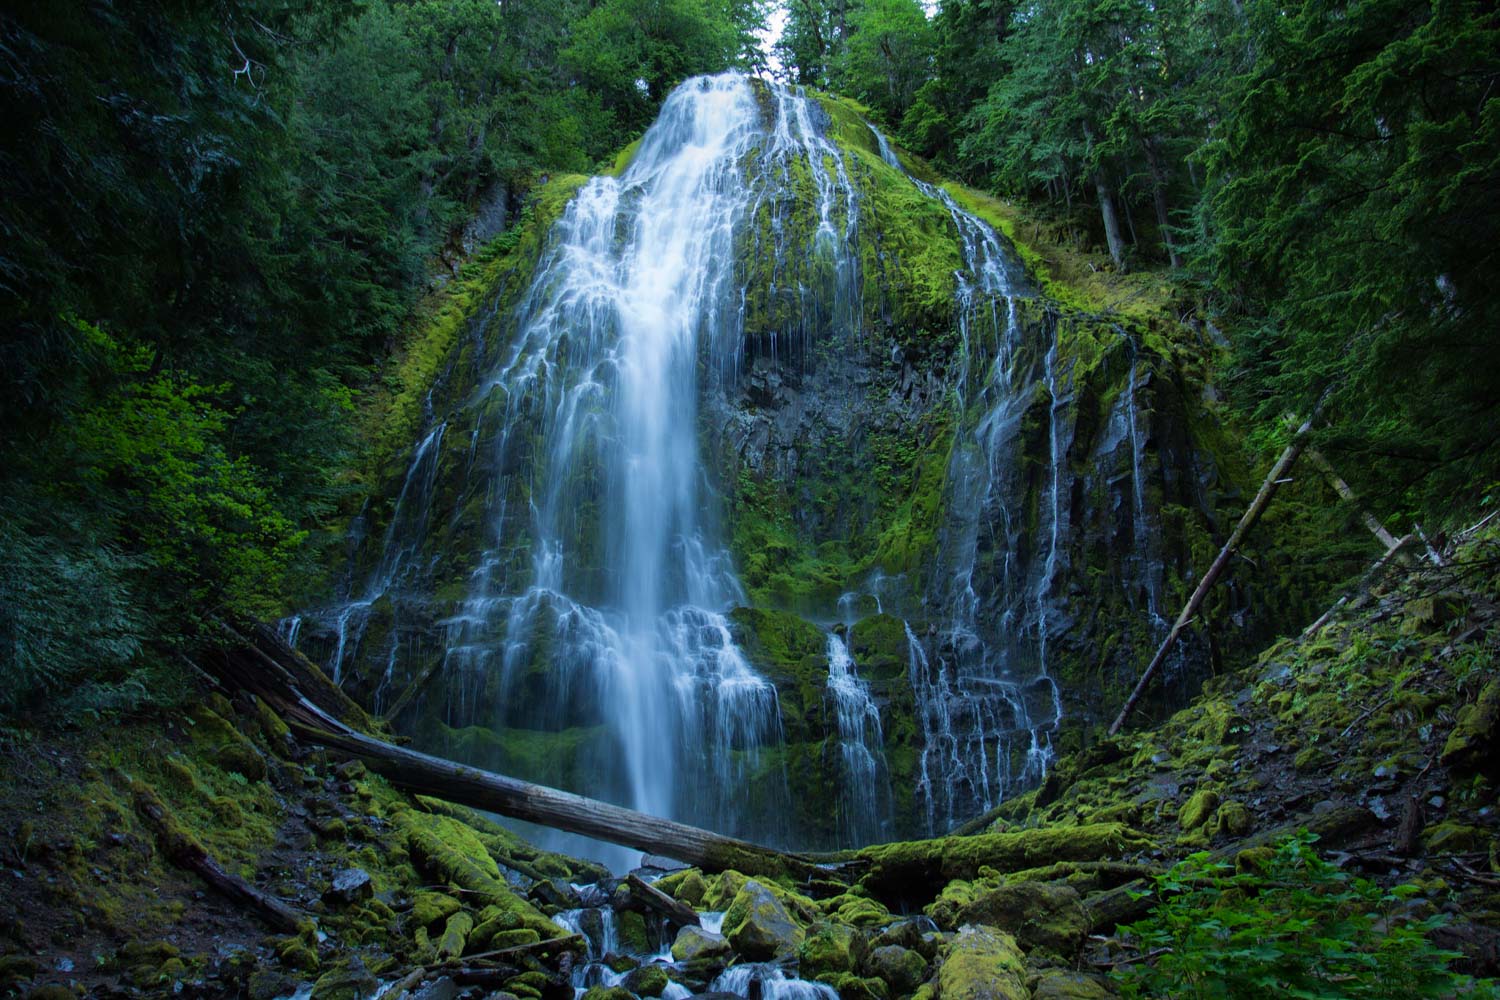 a stream of water cascades down a mossy rock face in a green forest